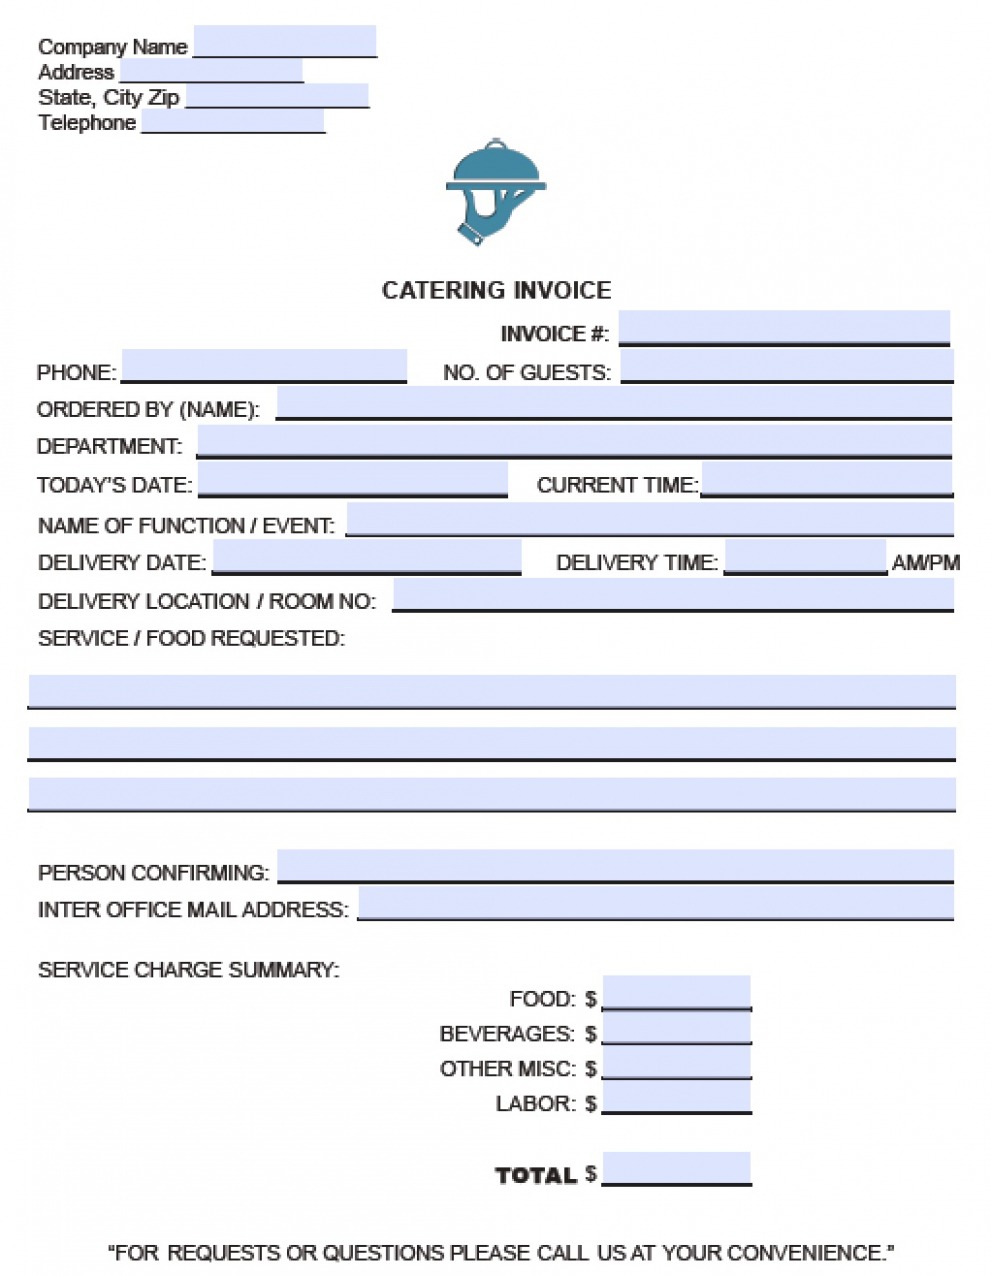 Sample Catering Service Invoice Template Word